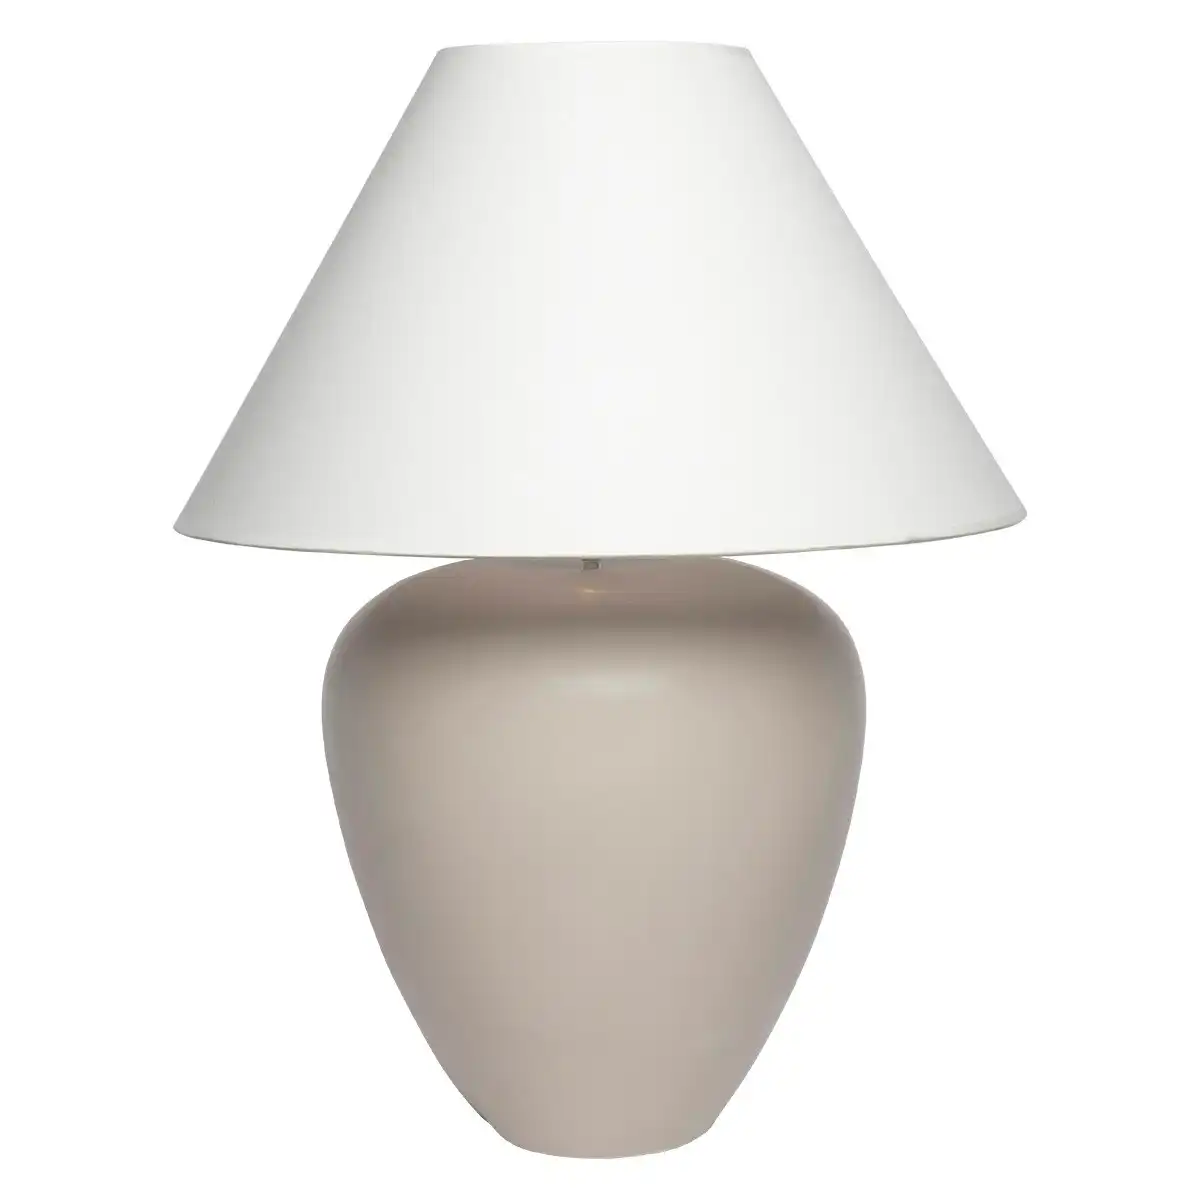 Cafe Lighting Picasso Table Lamp - Natural with White Shade